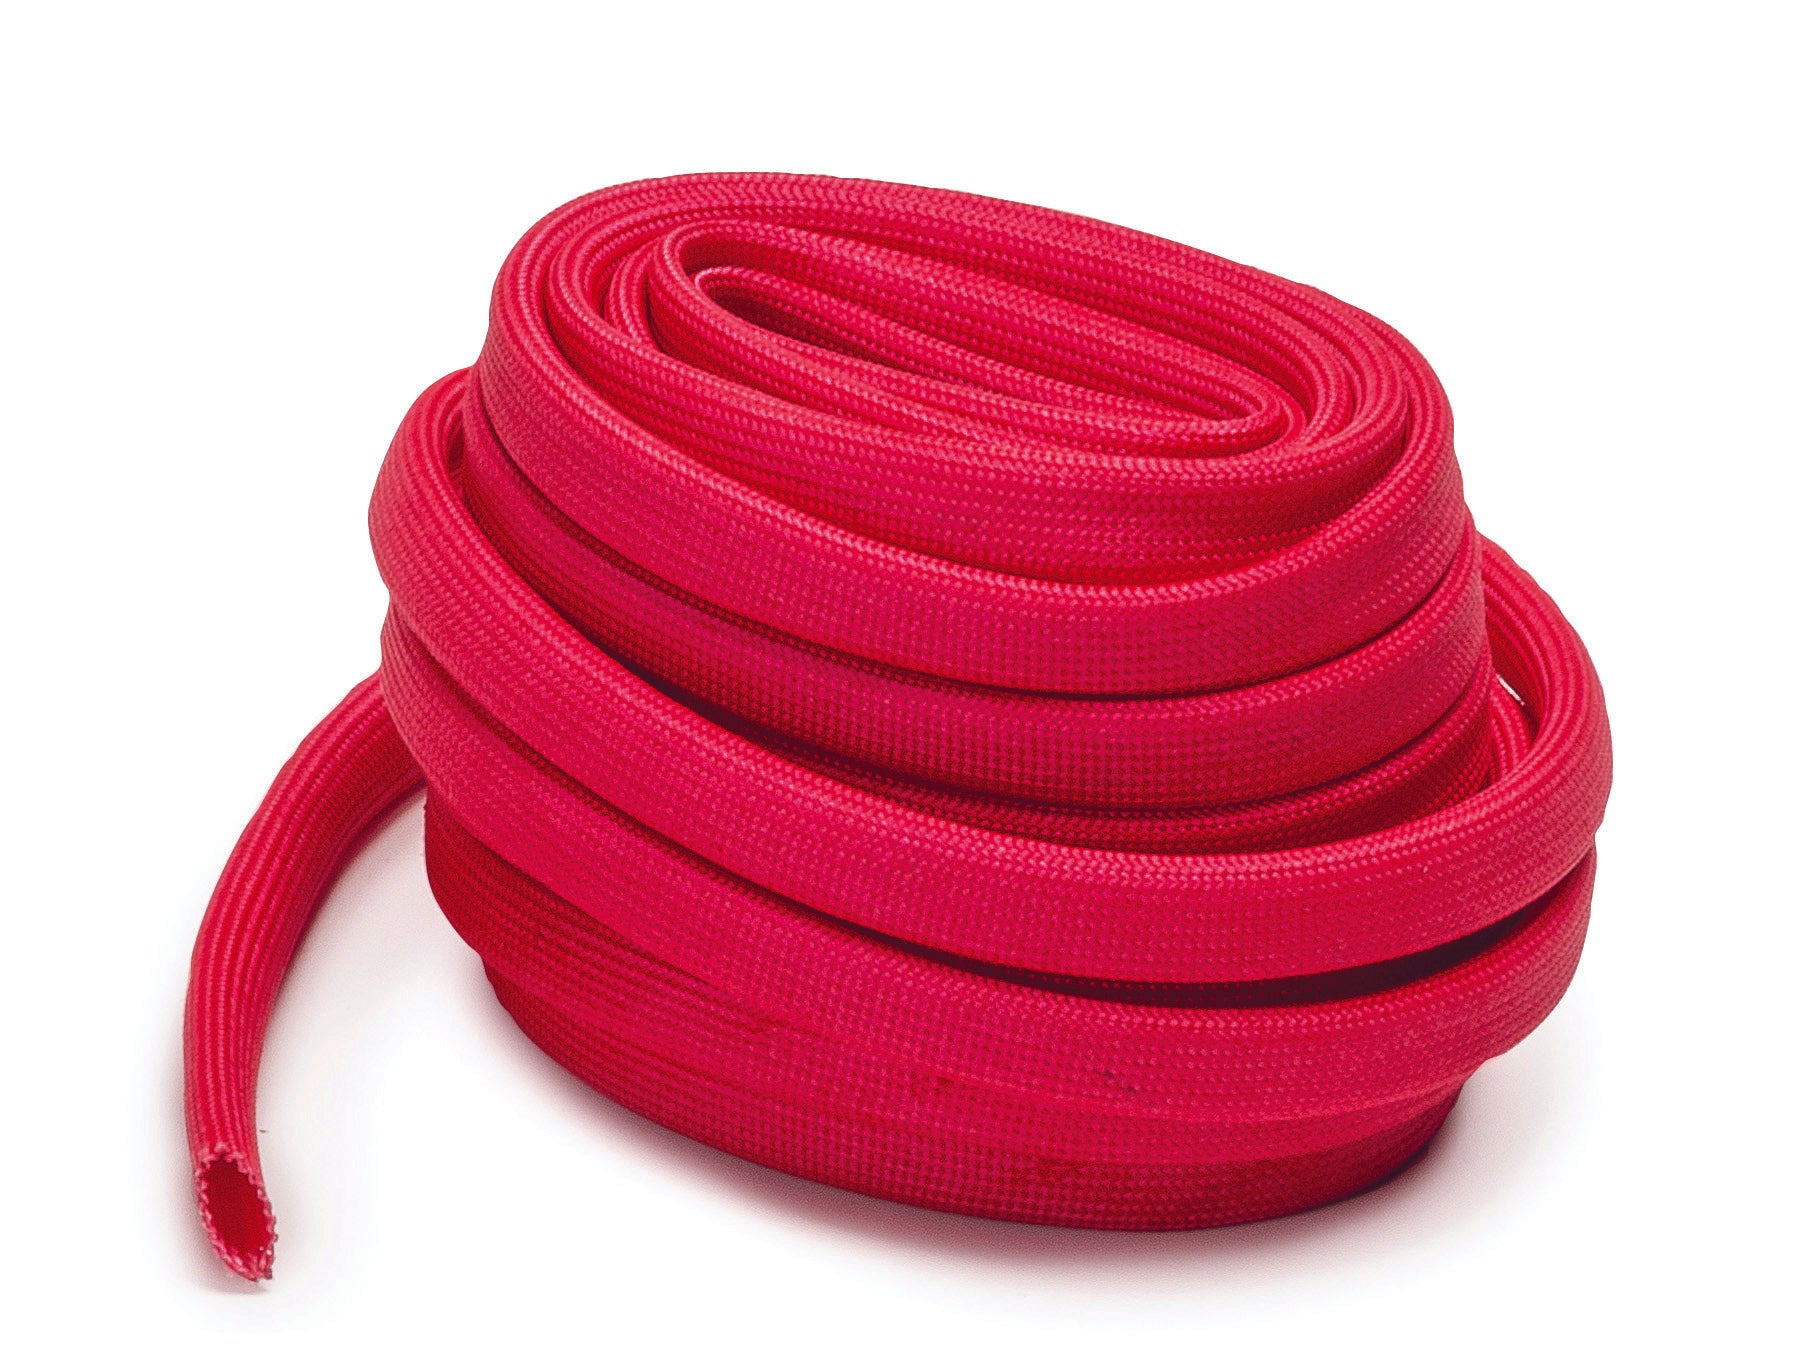 RED FIREPROOF SHEATH 5 METERS - Sparco Shop